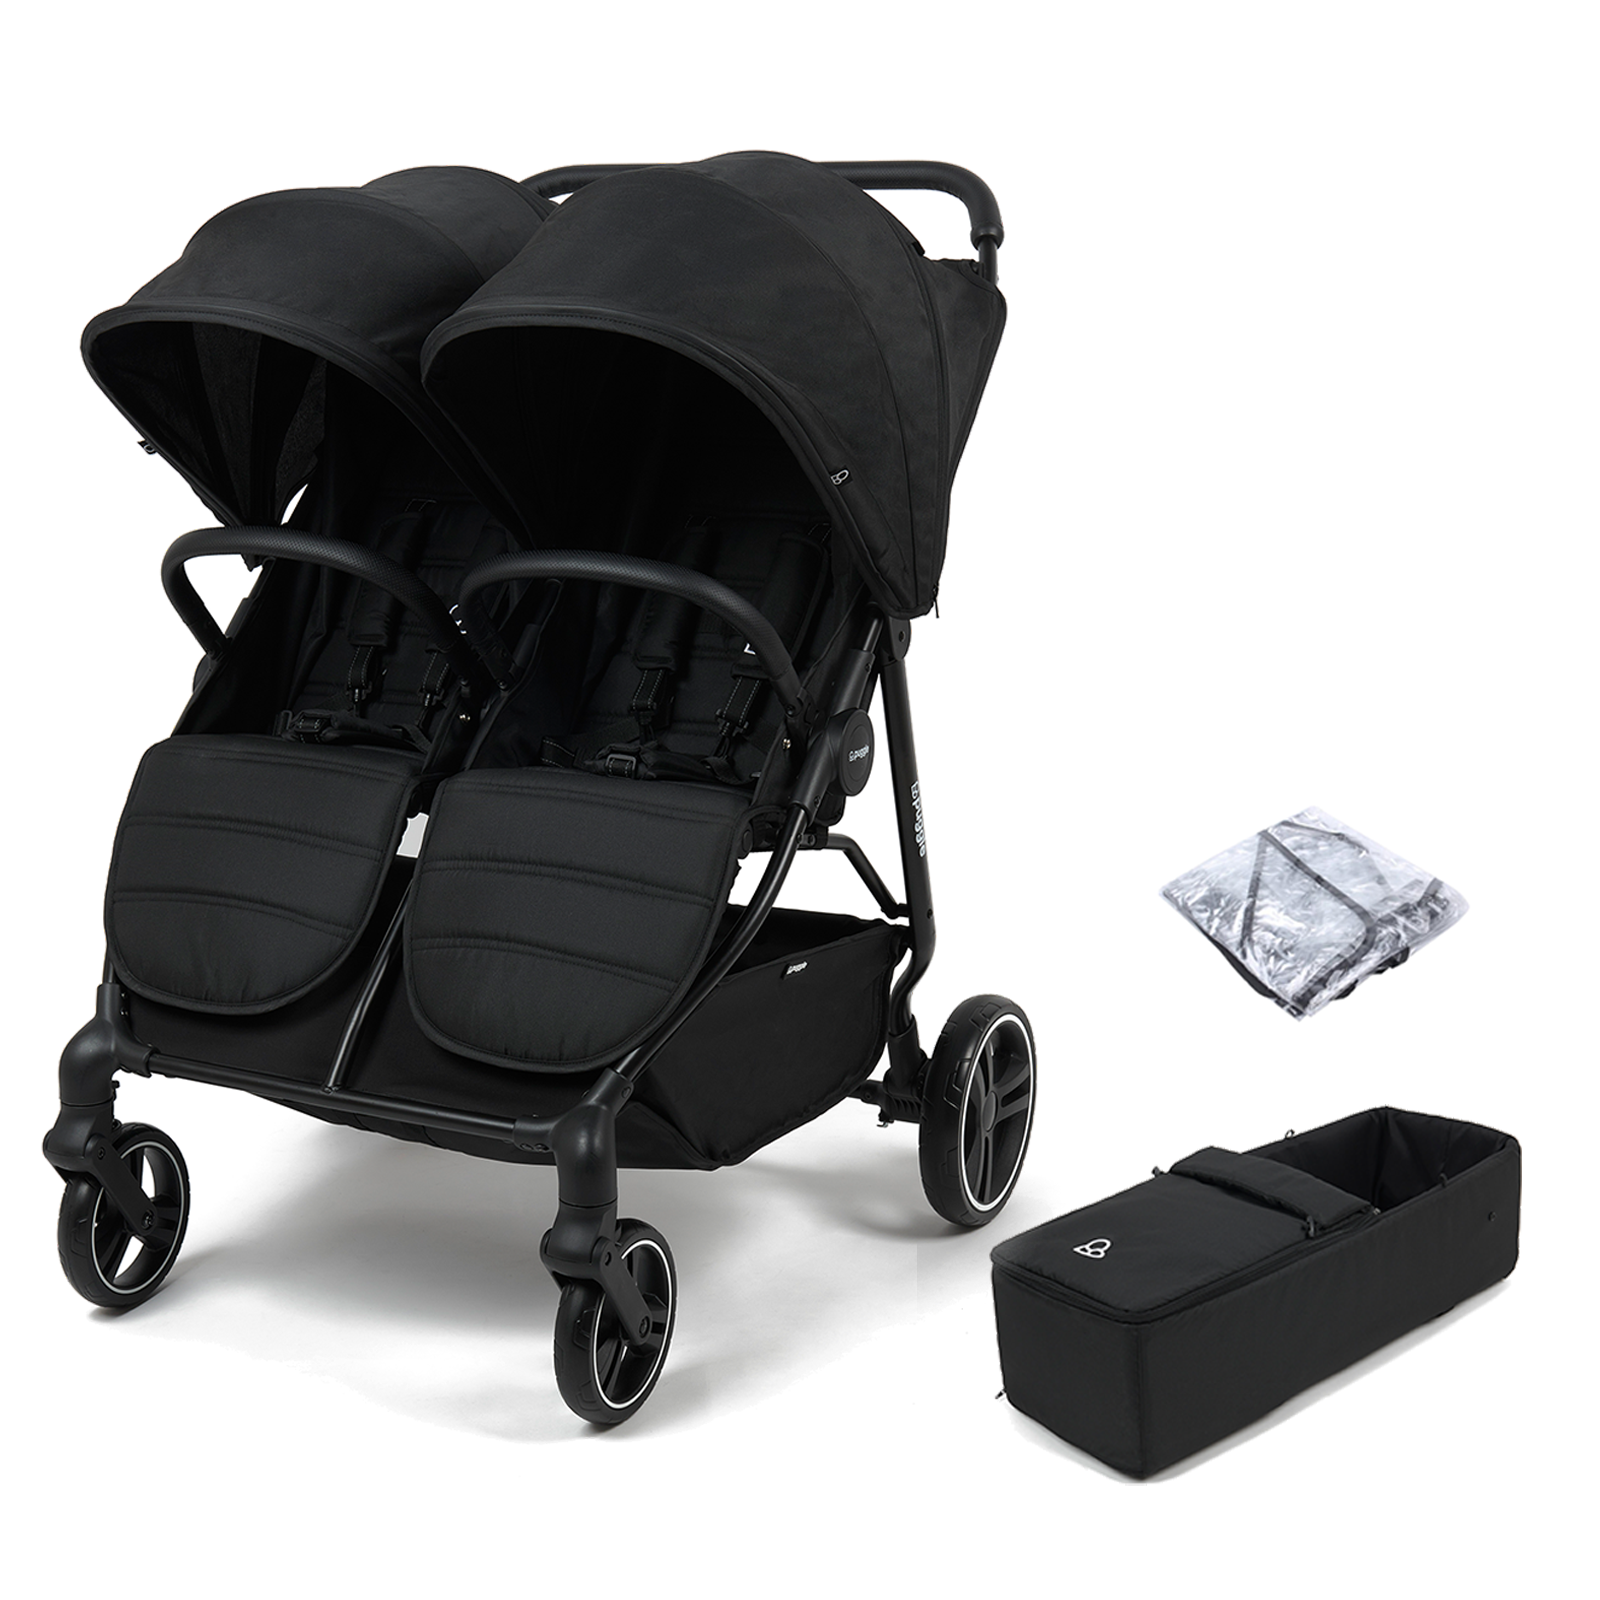 Puggle Urban City Easyfold Twin Double Pushchair + 1 Soft Carrycot - Storm Black